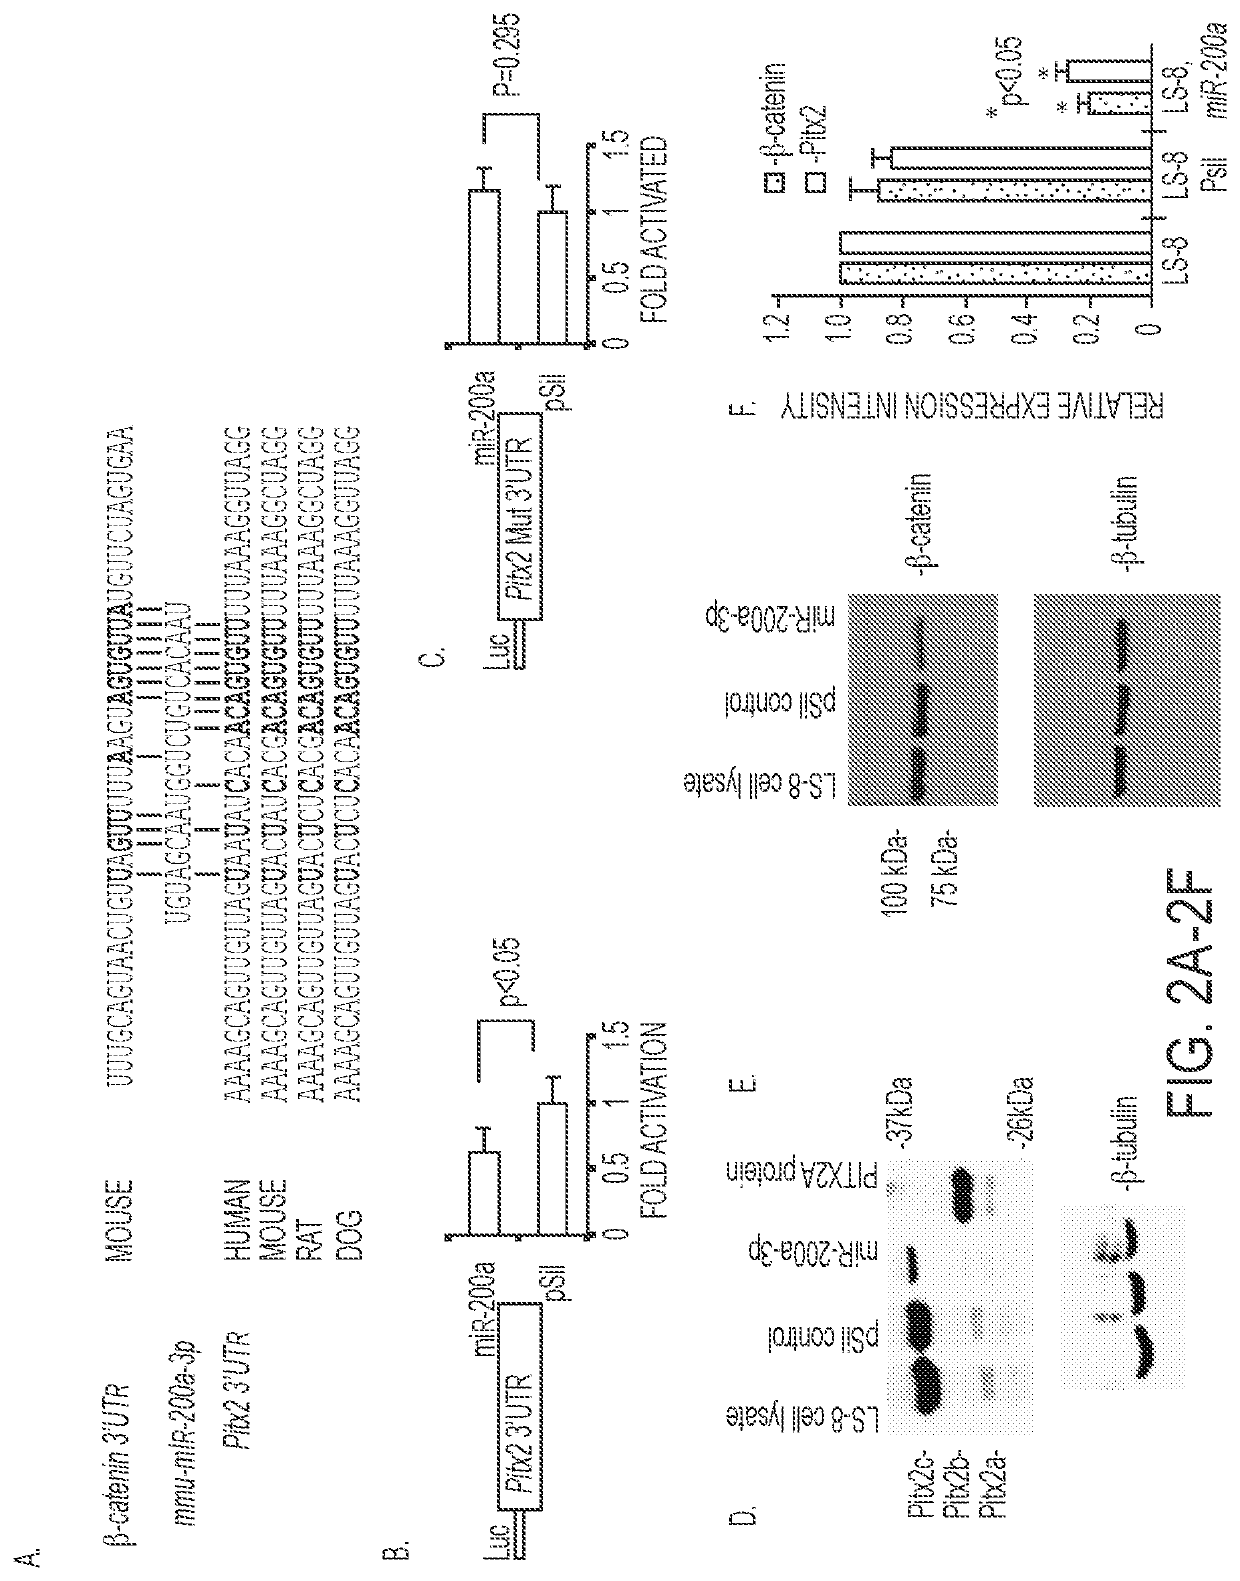 Methods to generate epithelial cells